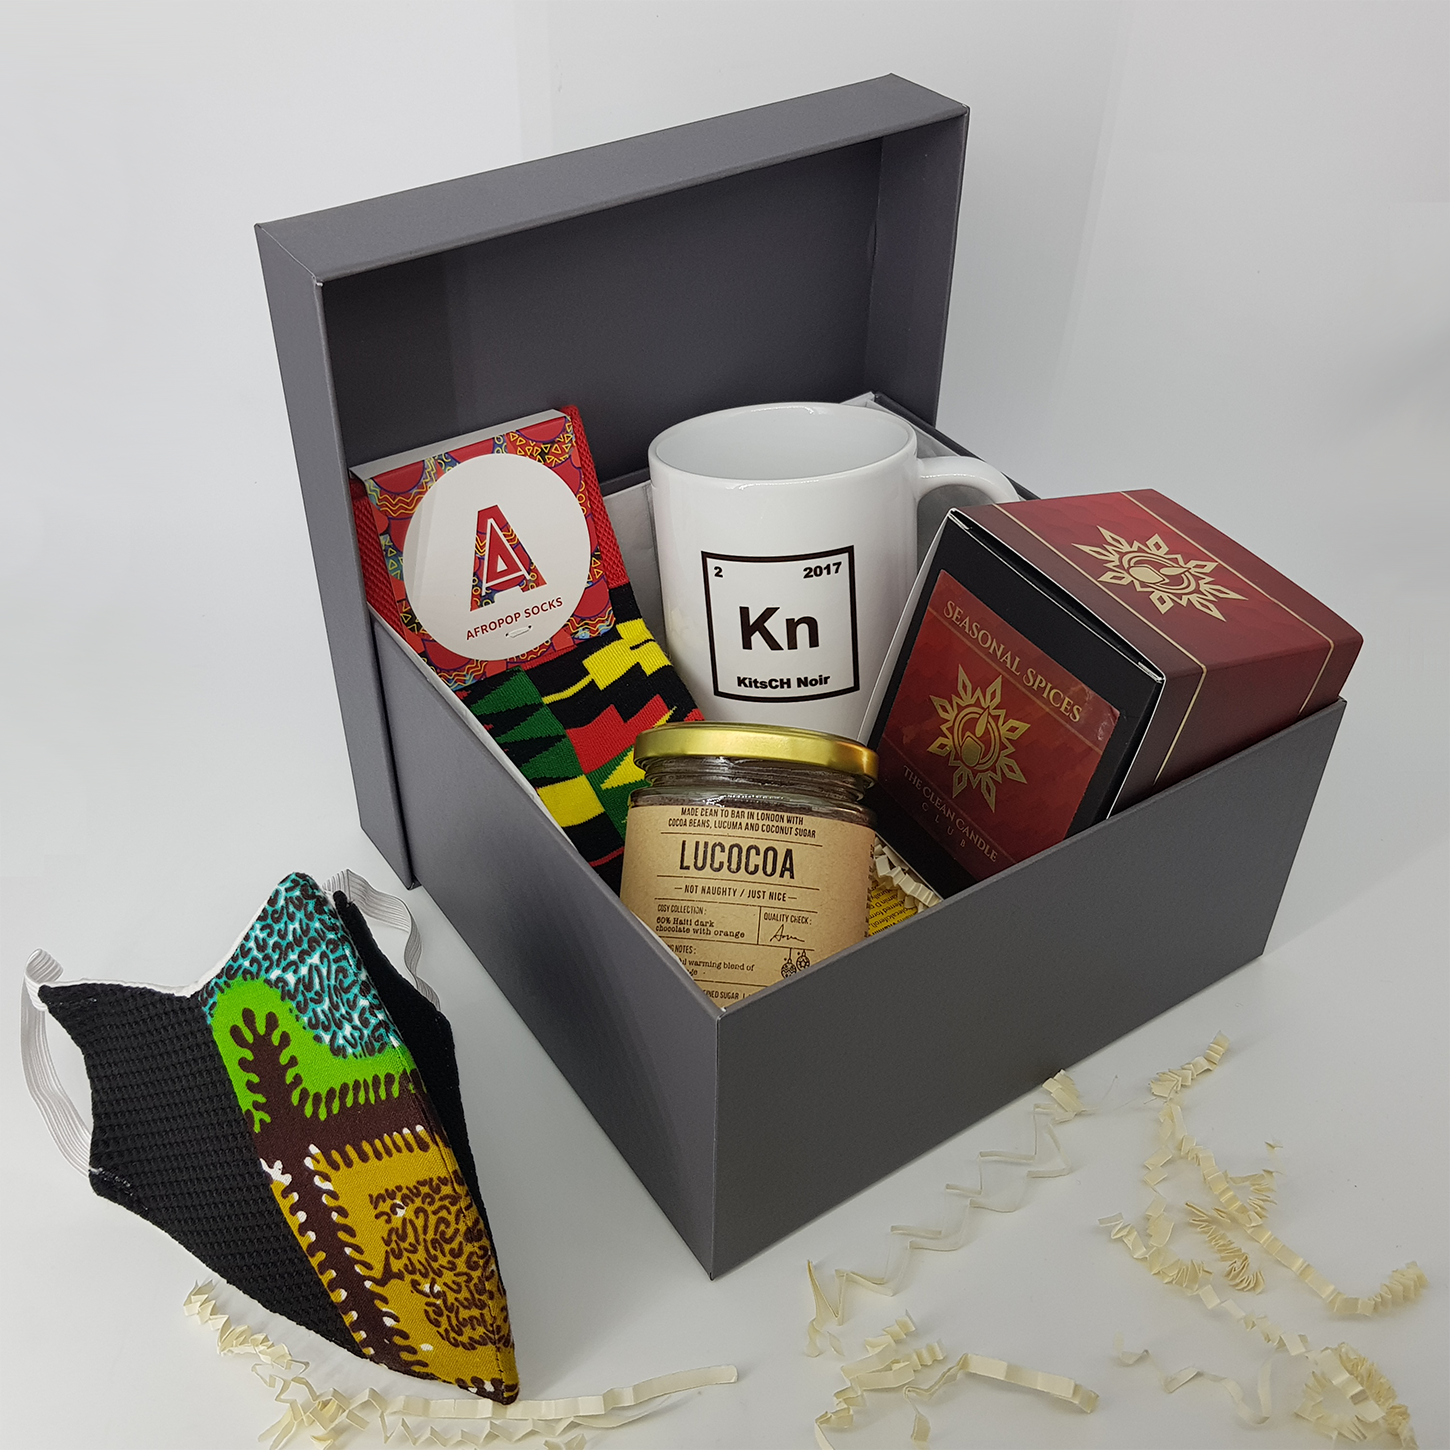 cosy edition gift box from forubox supportig black-owned businesses